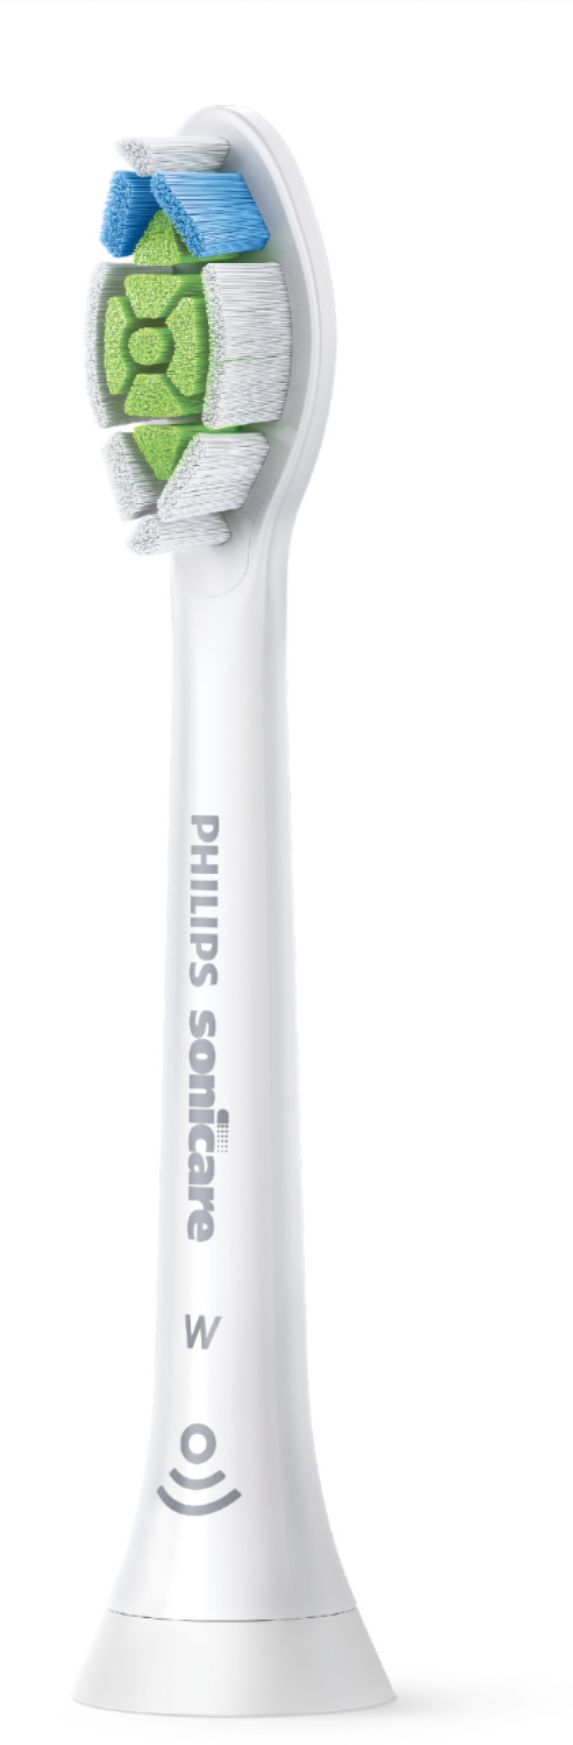 Left View: Philips Sonicare - ProtectiveClean 6100 Rechargeable Toothbrush - White